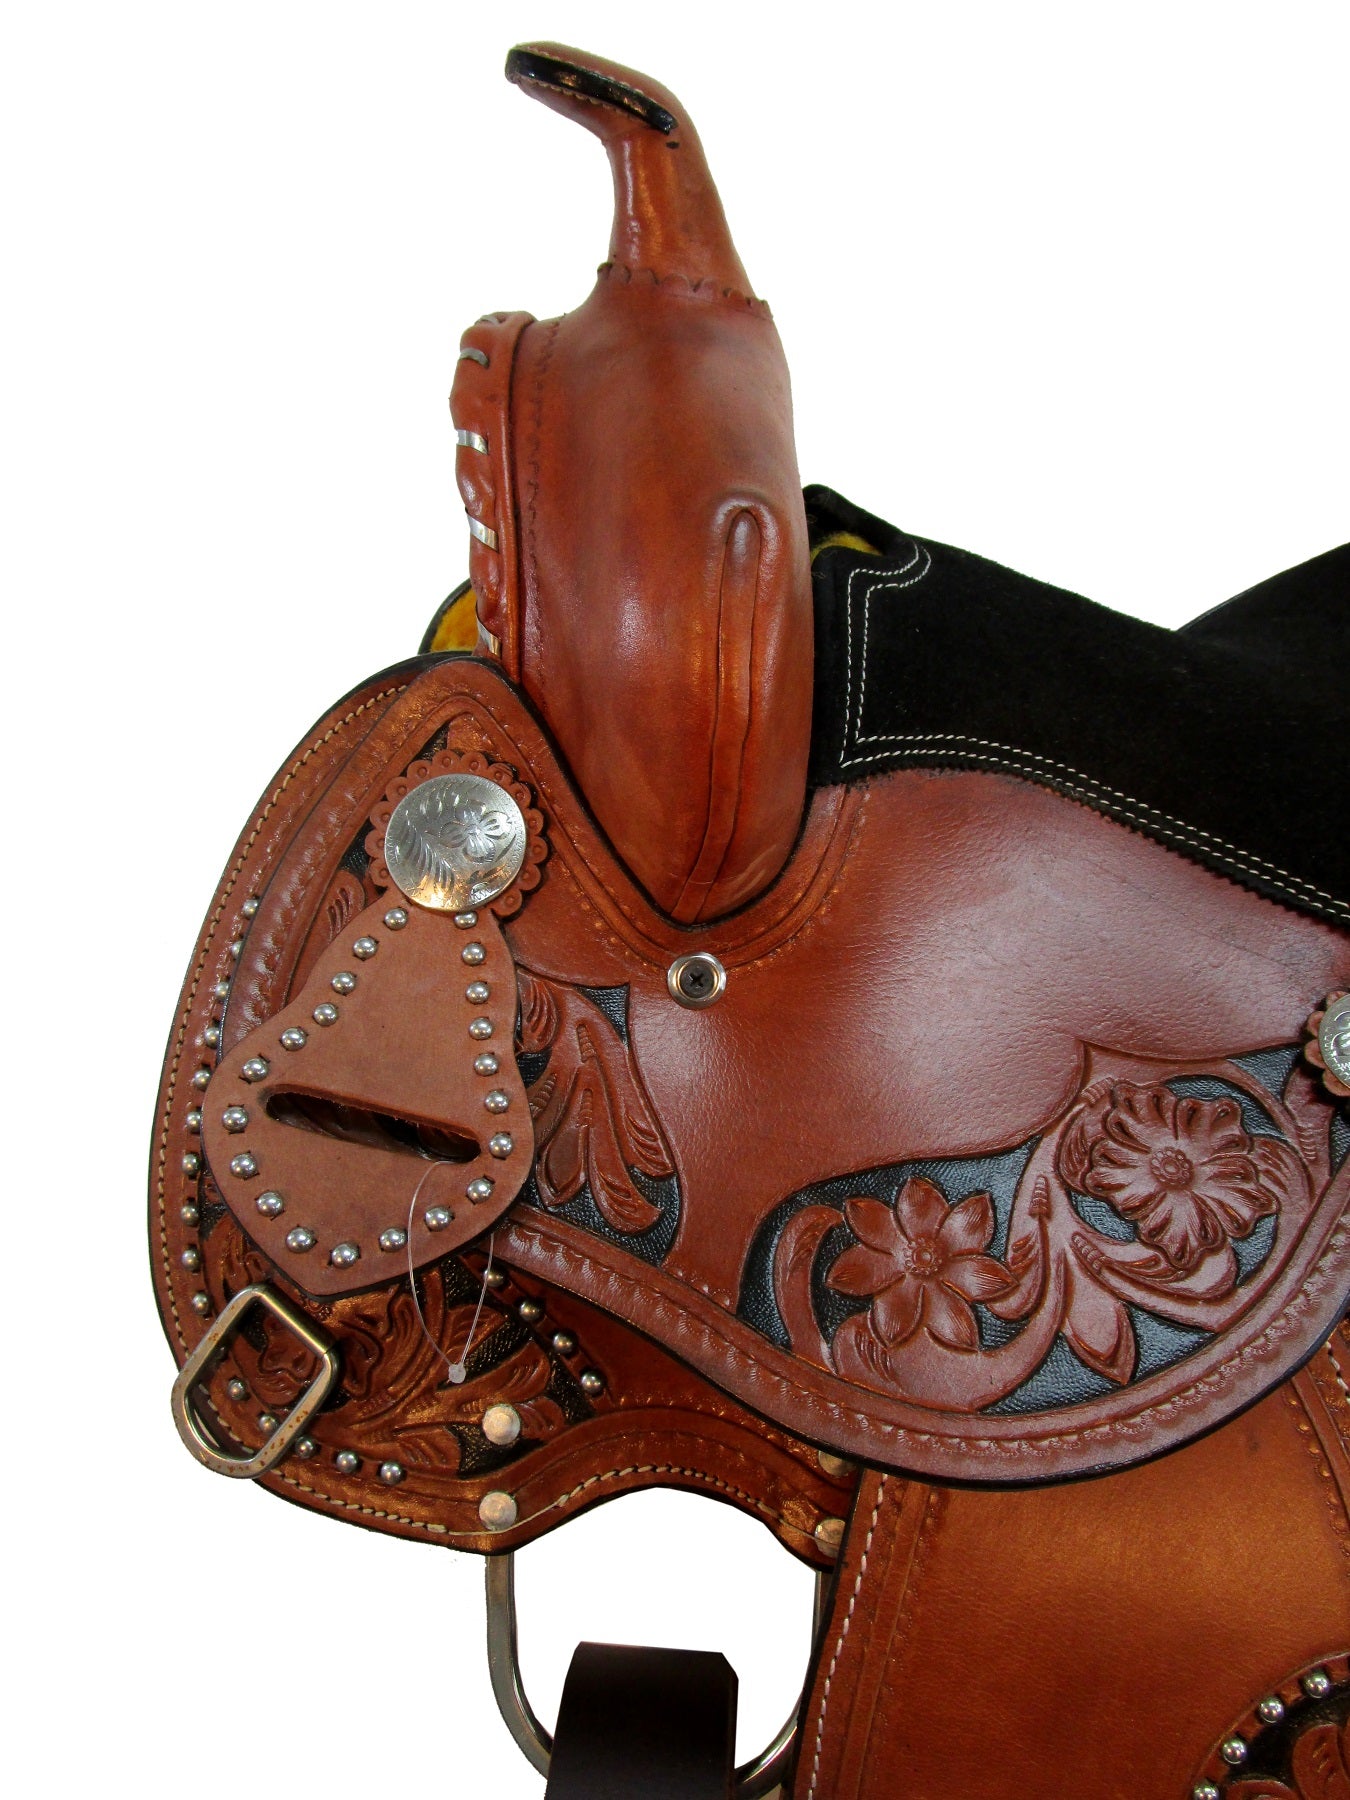 12 13 Youth Western Show Barrel Racing Saddle Horse Trail Pony Tack